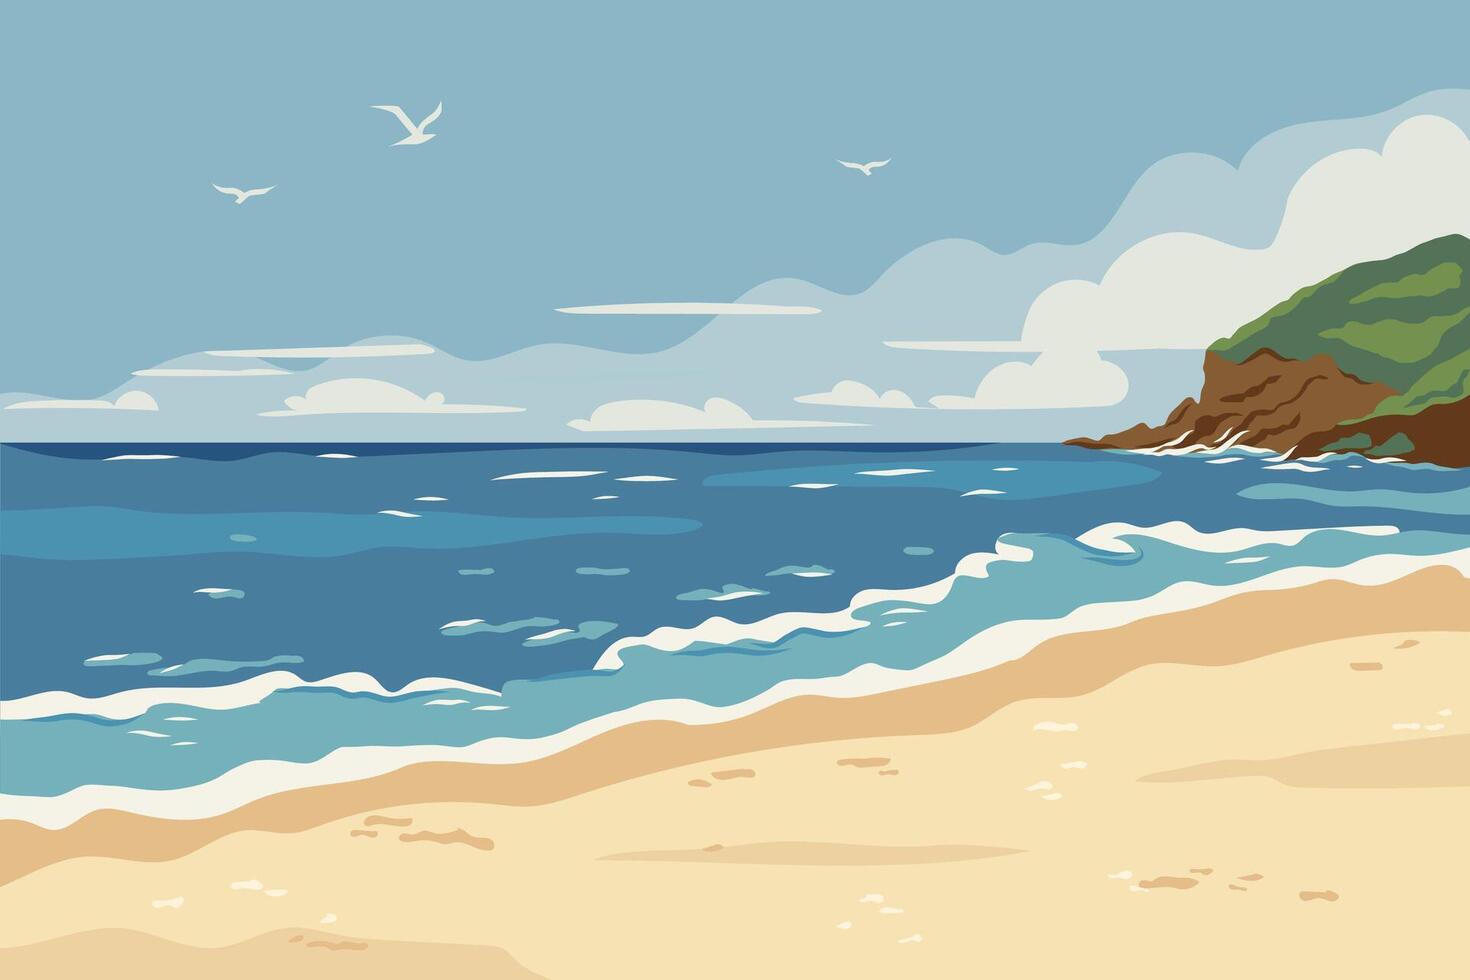 Cartoon summer beach. Landscape with sea coast, sand beach, sky and rocks. Horizontal seaside with sandy ocean shore and clouds on horizon. Seashore panoramic view. Flat background illustration vector